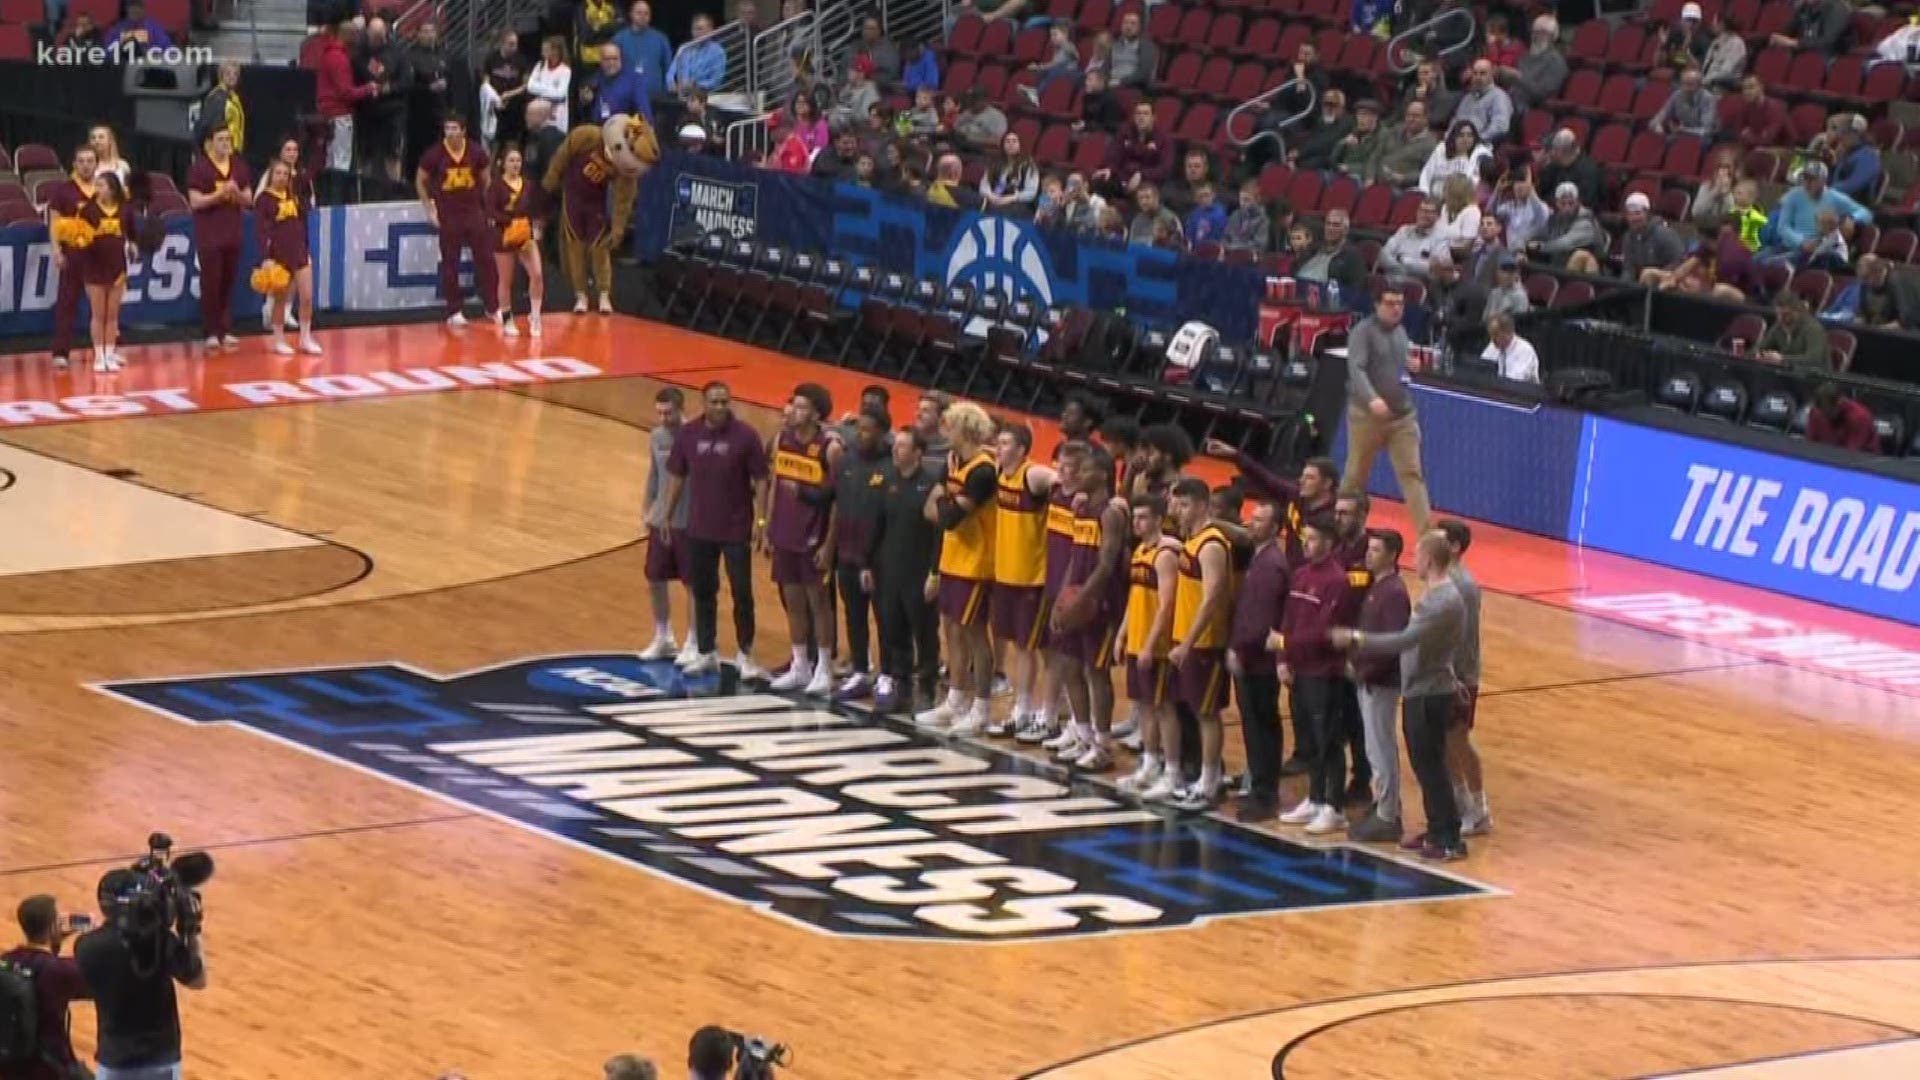 Some key players from a Minnesota Golden Gophers team return to the big dance with far more experience.